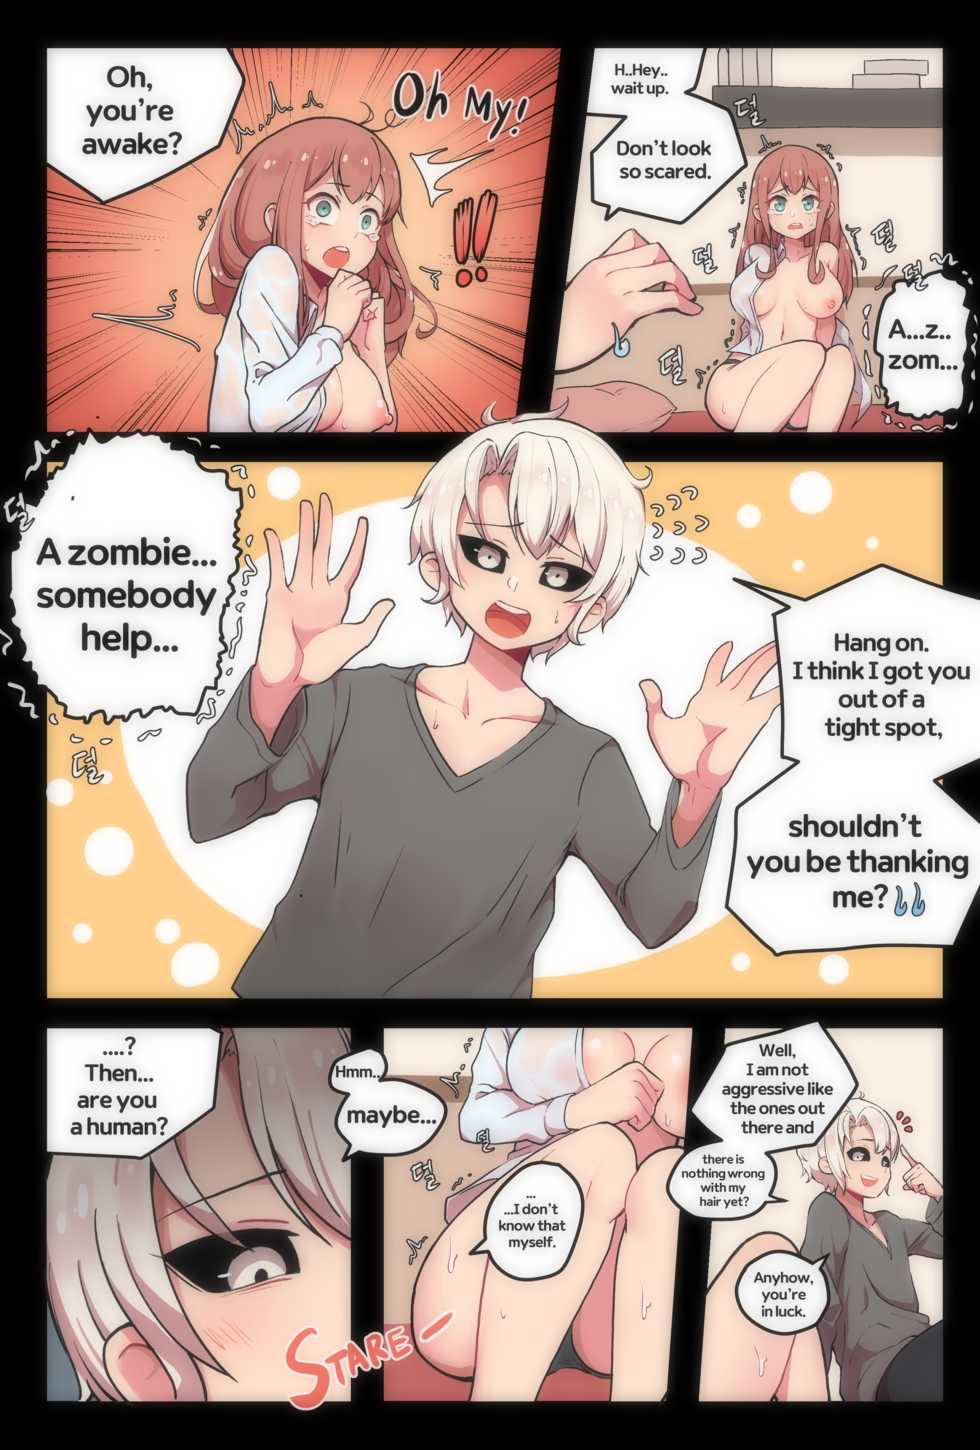 [Creeeen] Zombie [English] (ongoing) - Page 8